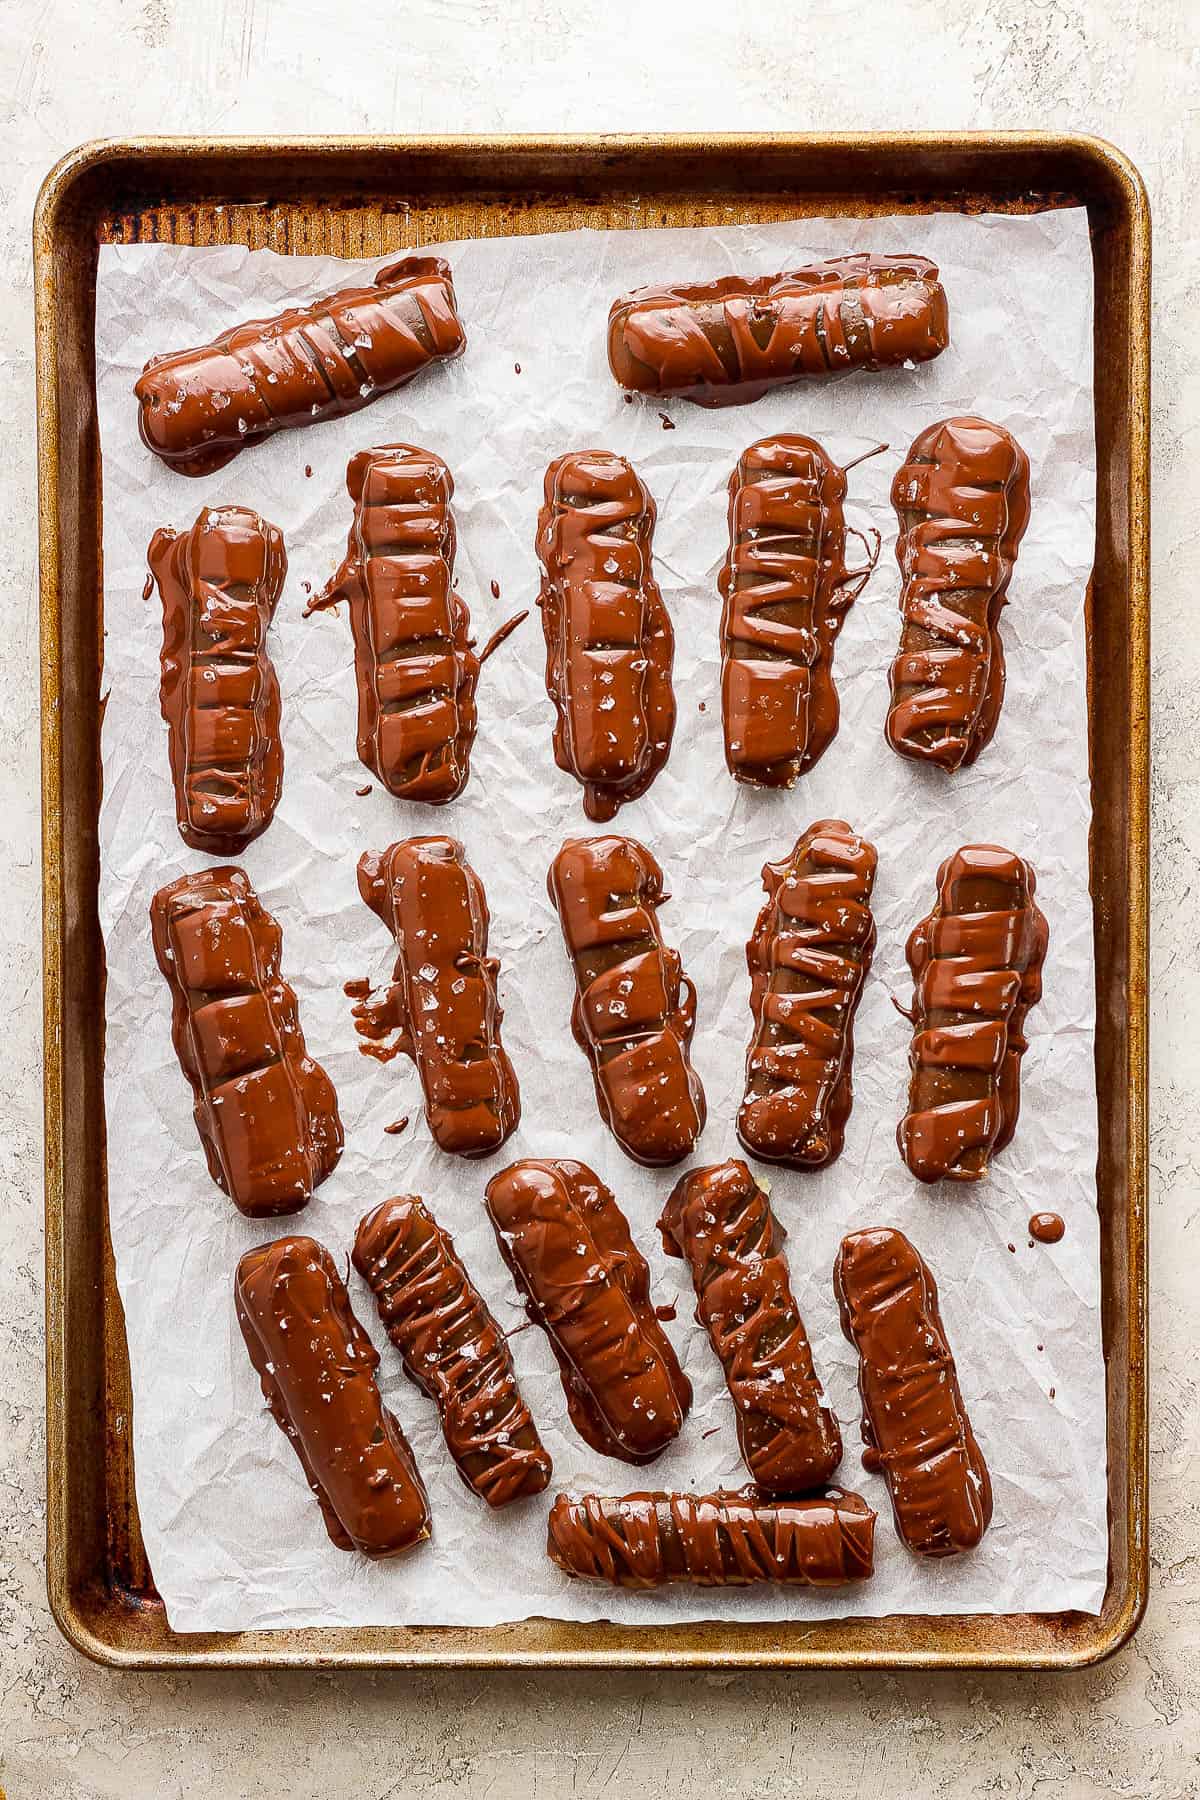 All of the twix bars coated in chocolate and placed on a parchment-lined baking sheet.